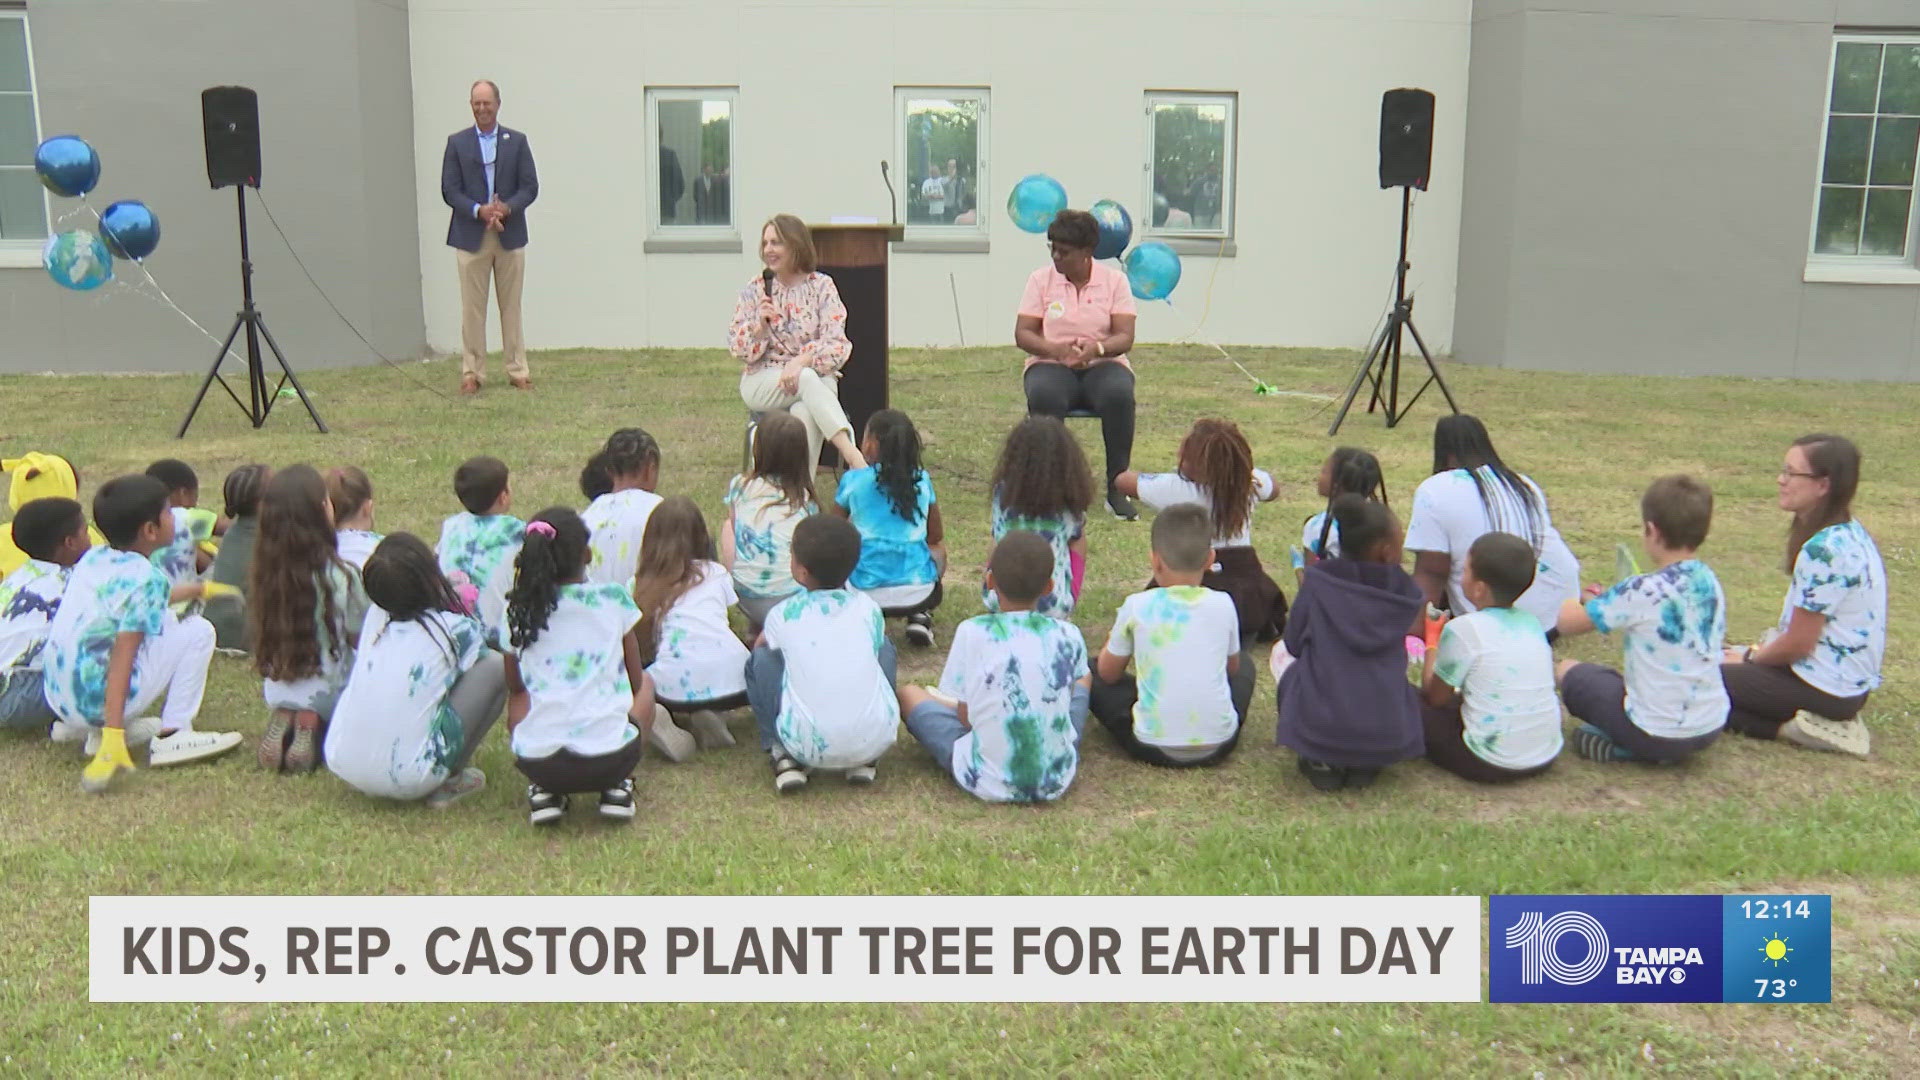 Congresswoman Kathy Castor joins second-grade students at Frost Elementary School in planting a tree, educating them about the importance of native Florida trees.